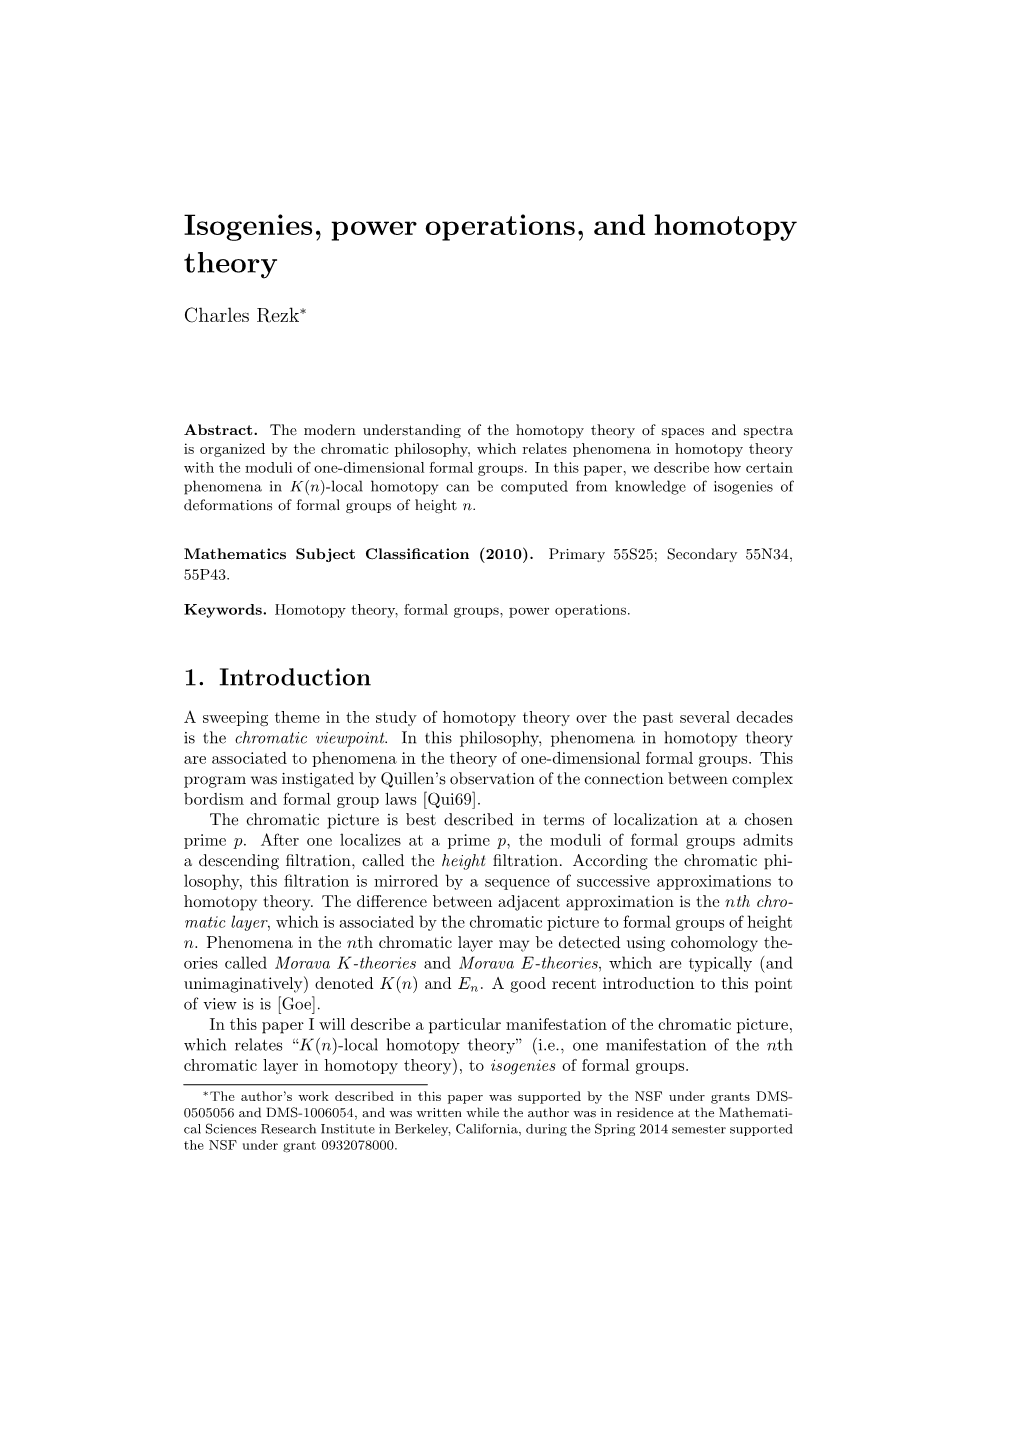 Isogenies, Power Operations, and Homotopy Theory